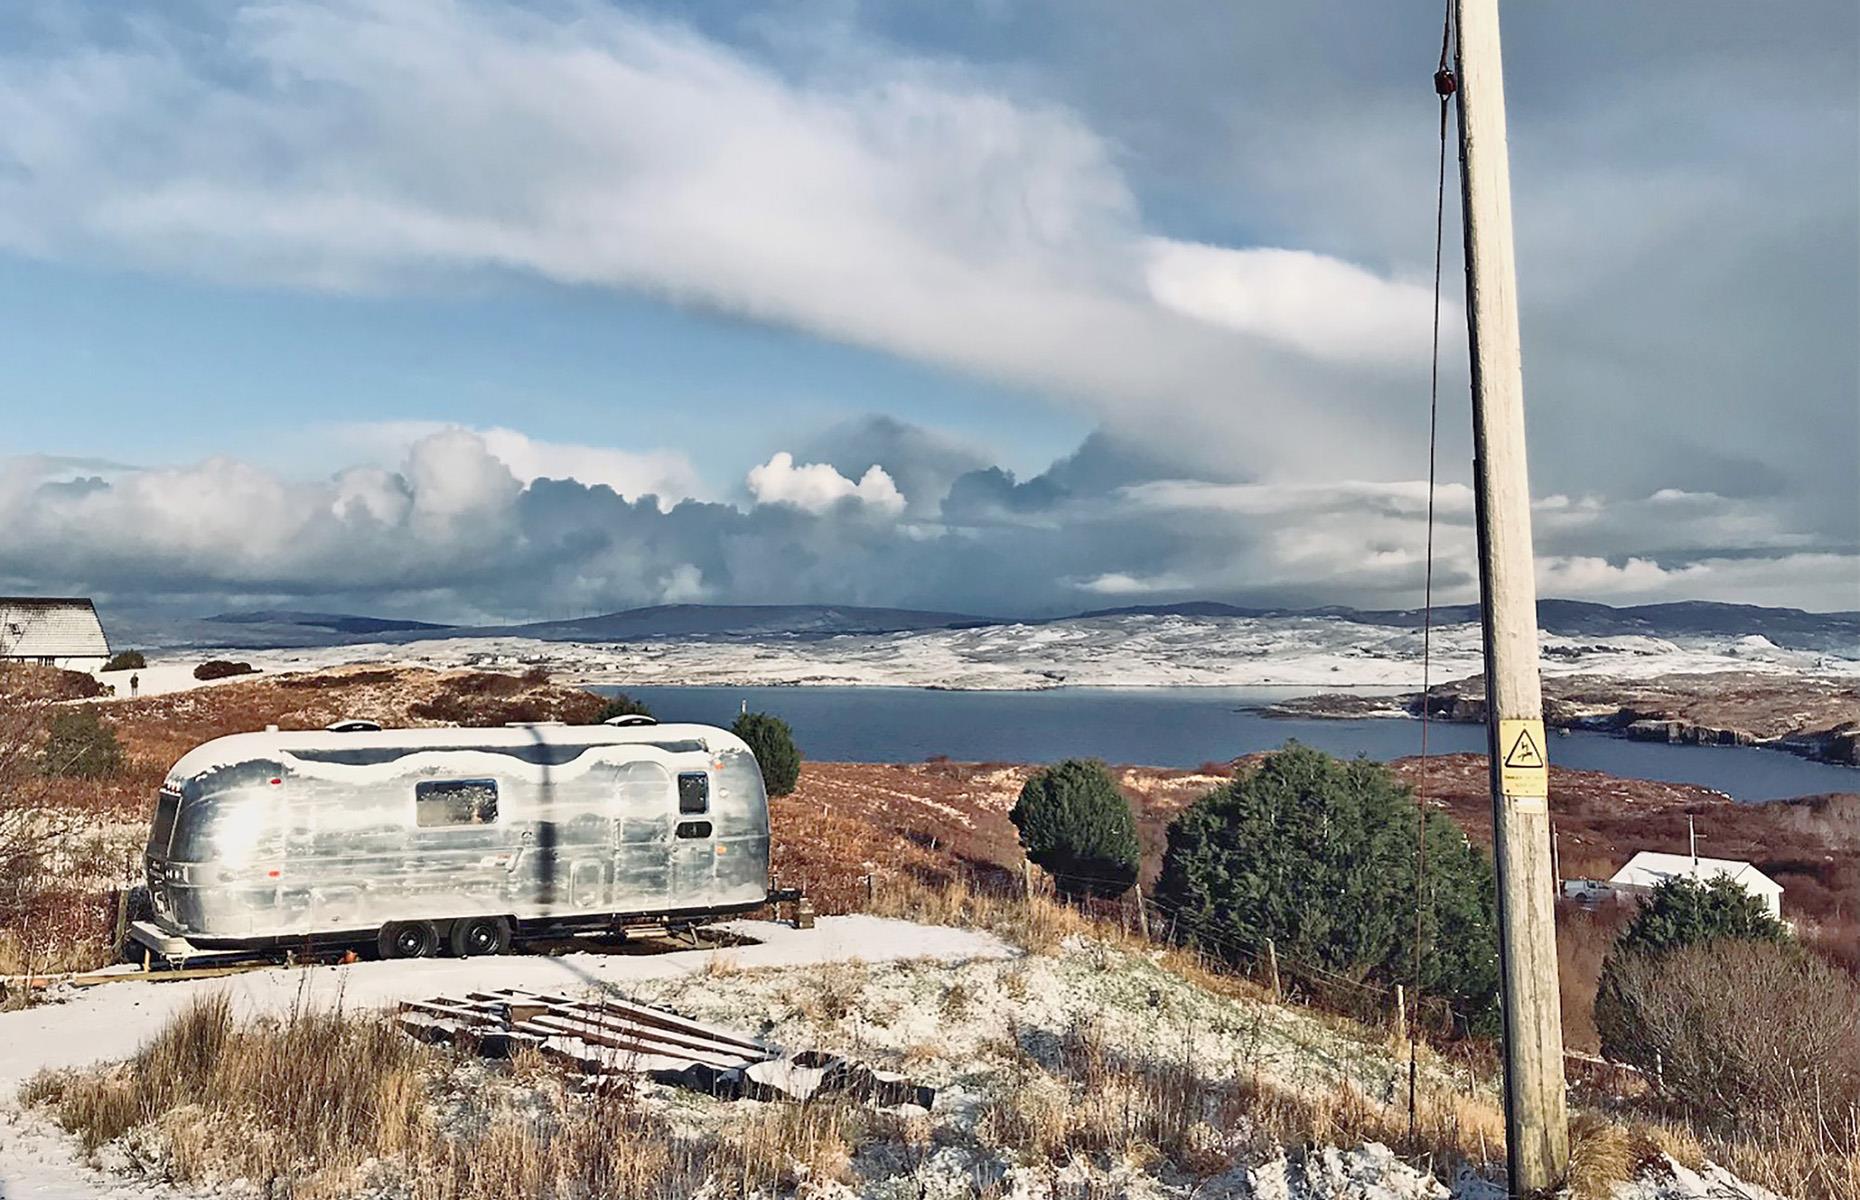 <p>Brand new to the Isle of Skye is <a href="https://www.kiphideaways.com/hideaways/aurora-skye/">this perfectly placed Airstream trailer</a>, overlooking Fiscavig Bay. Equipped with a record player for long afternoons on the decking, it's a wildlife lover's dream. From the nearby beach you could spot mike whales while the comfy chairs on a private deck are great for sipping Scottish whisky and looking out for white-tailed eagles.</p>